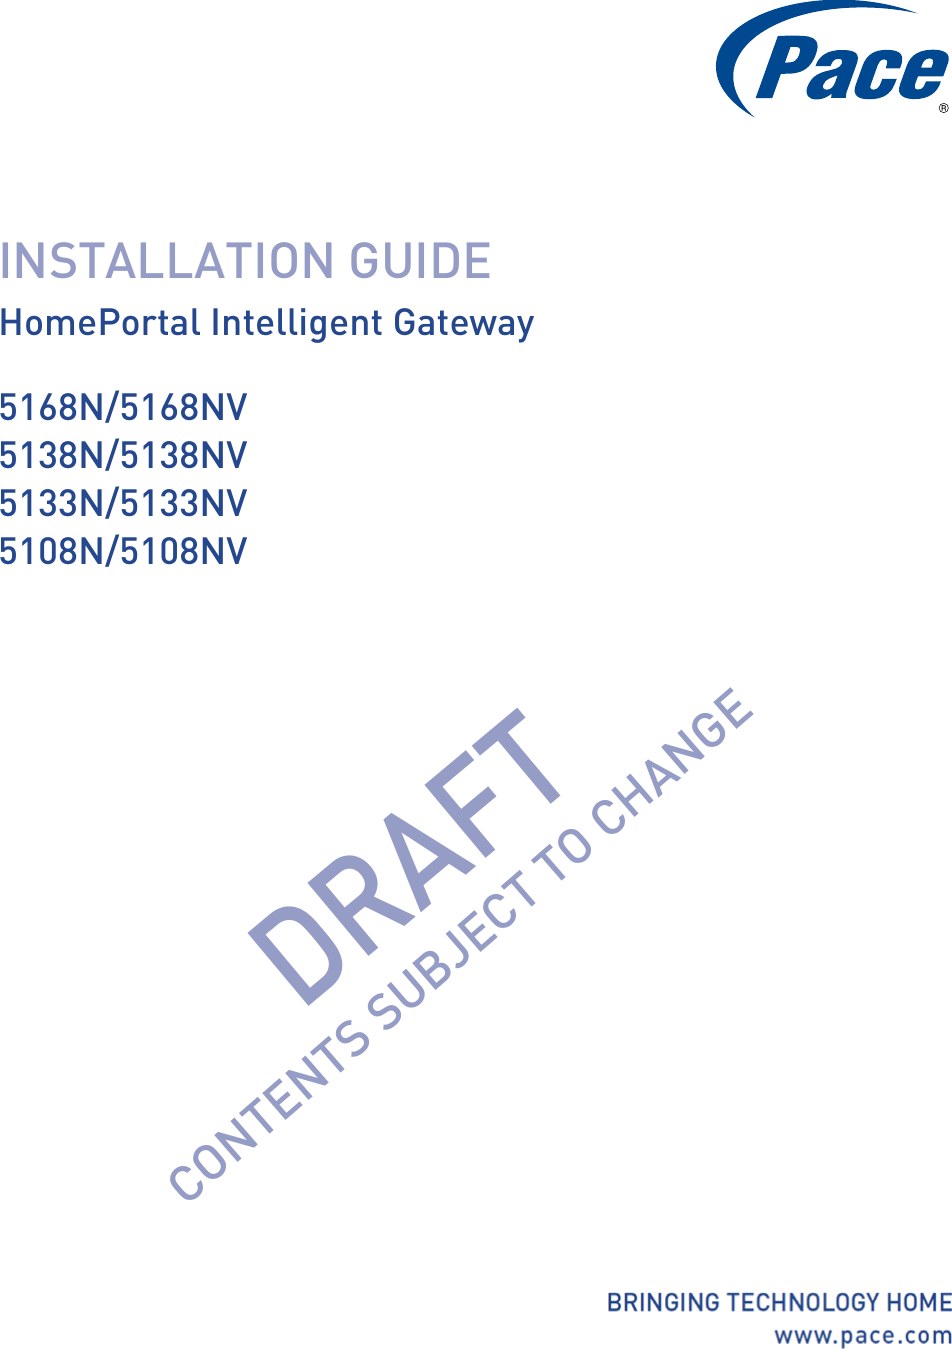 INSTALLATION GUIDEHomePortal Intelligent Gateway5168N/5168NV5138N/5138NV5133N/5133NV5108N/5108NVDRAFT CONTENTS SUBJECT TO CHANGE